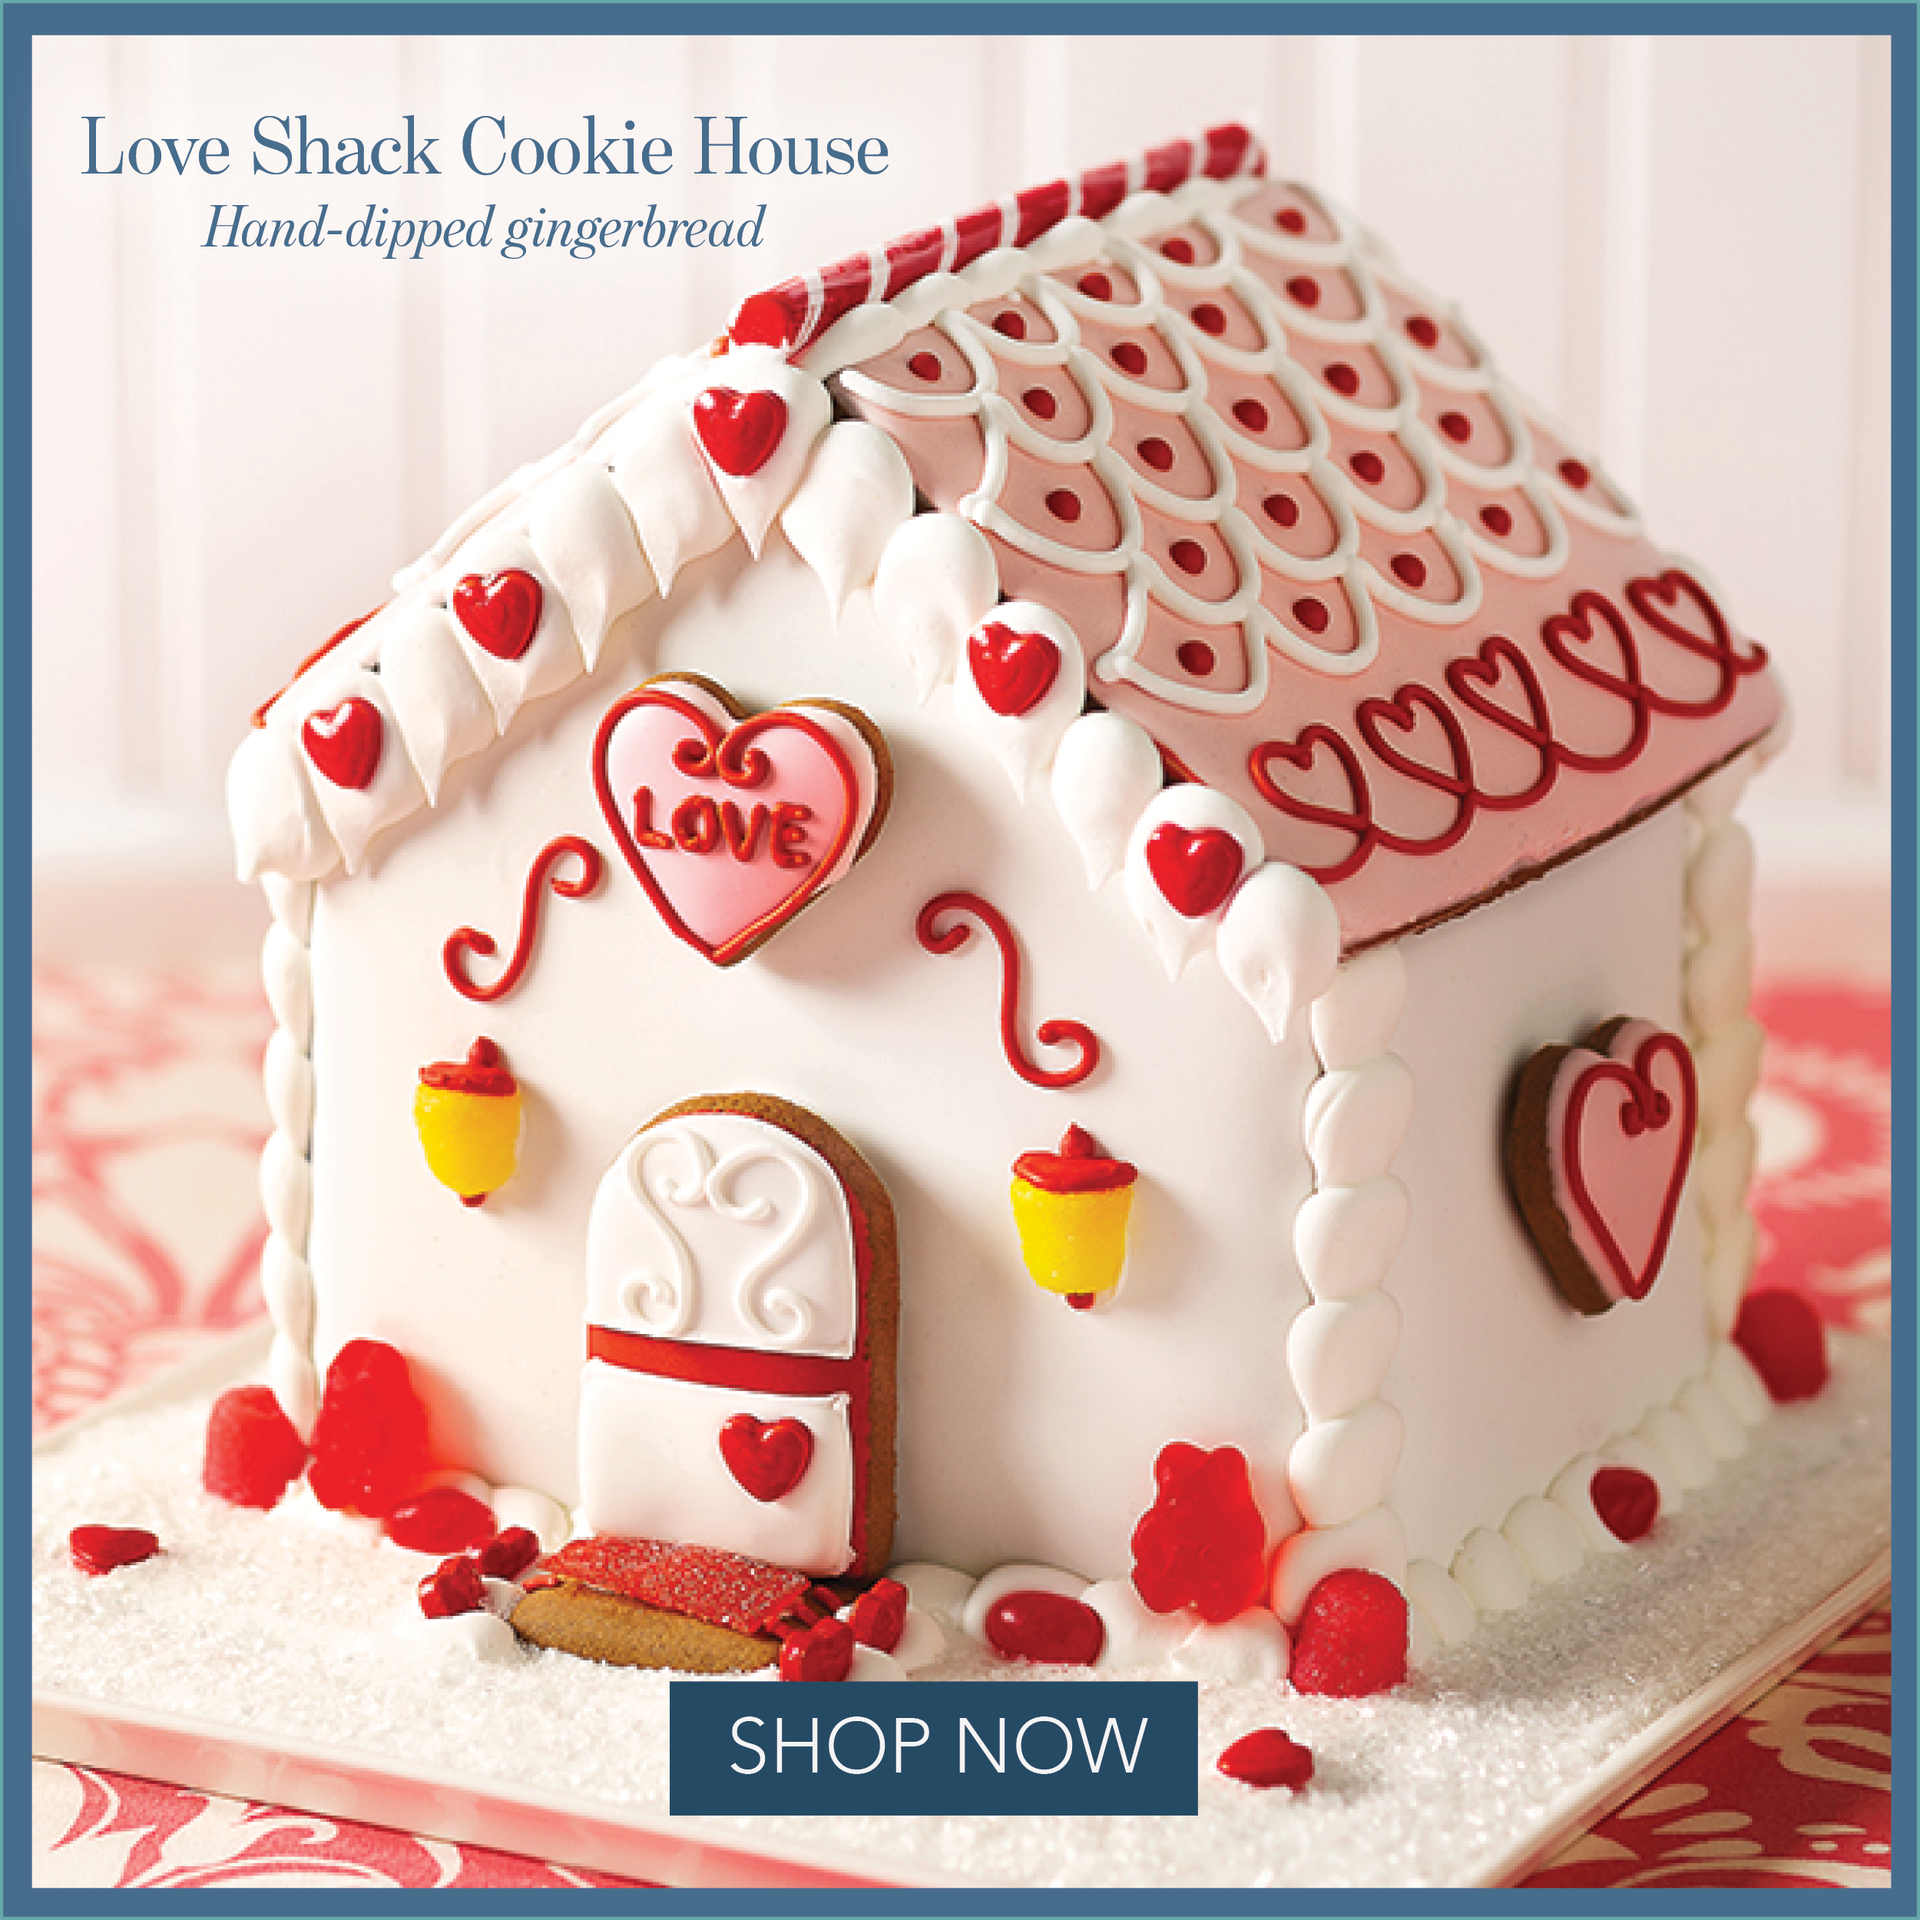 LOVE SHACK COOKIE HOUSE